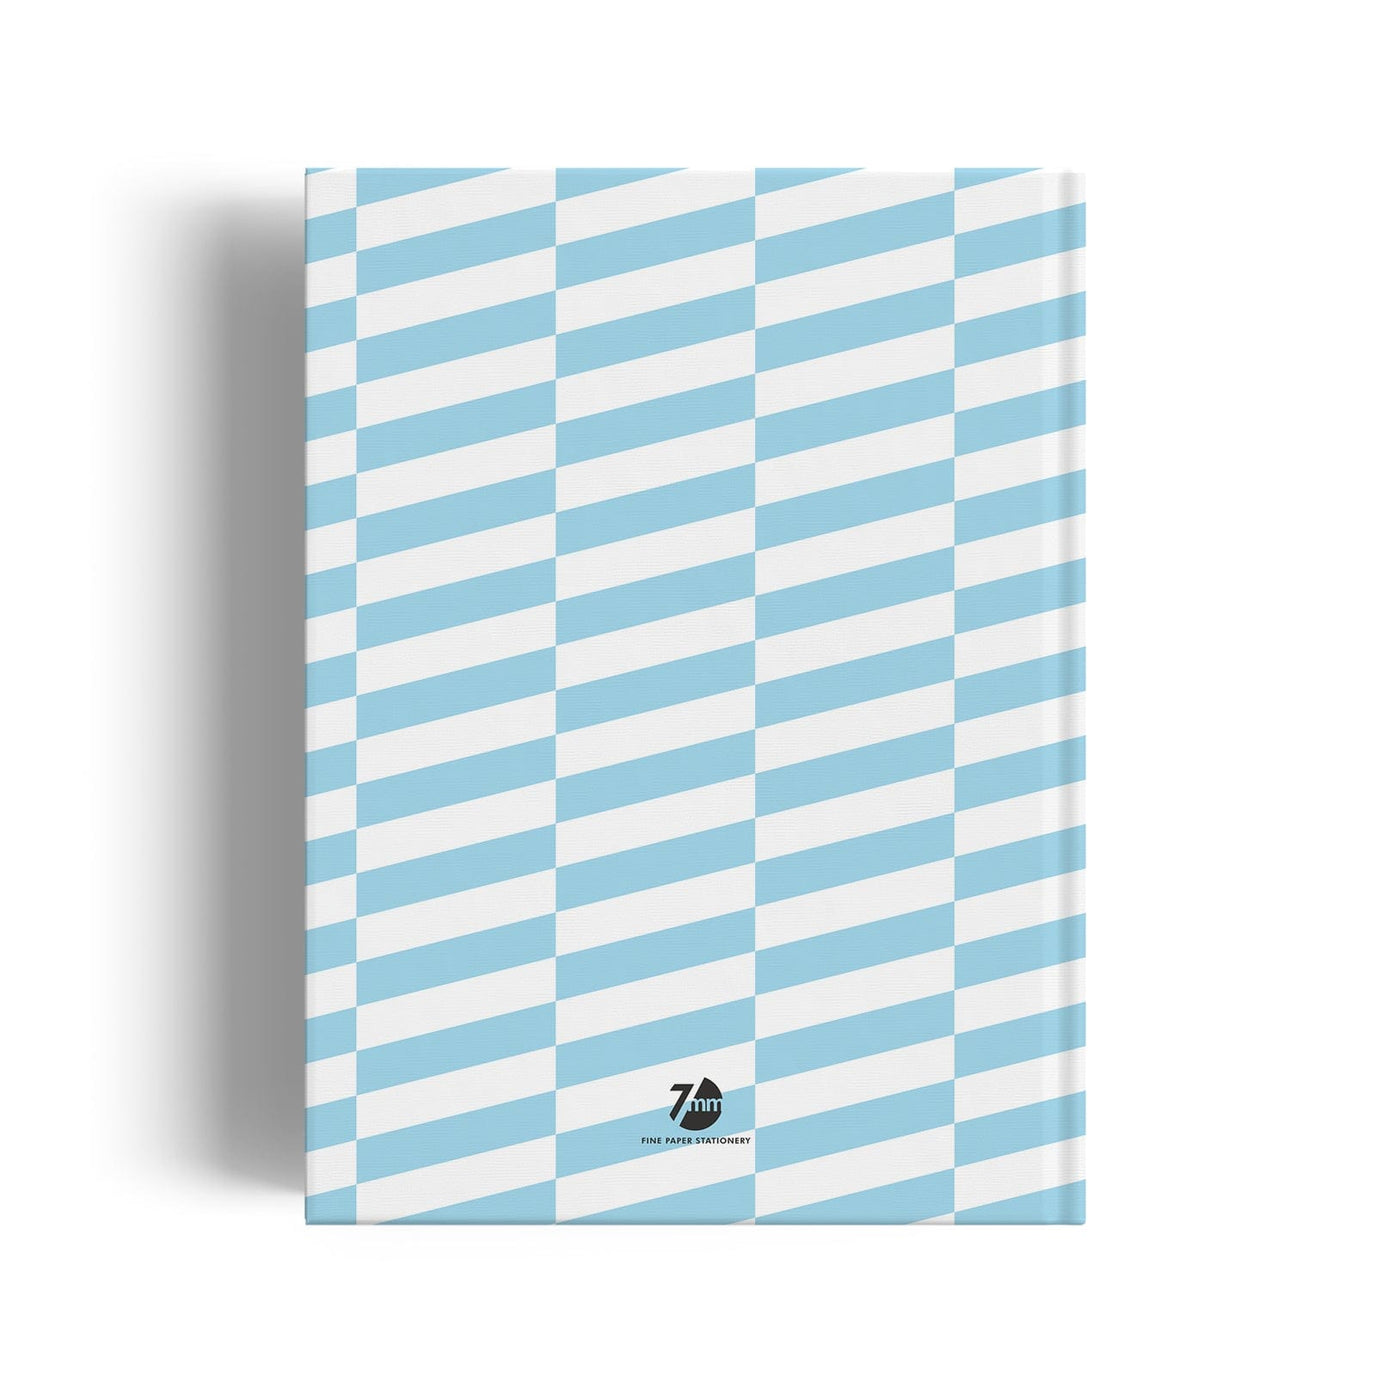 Great ideas Blue A5 Notebook 160 pages